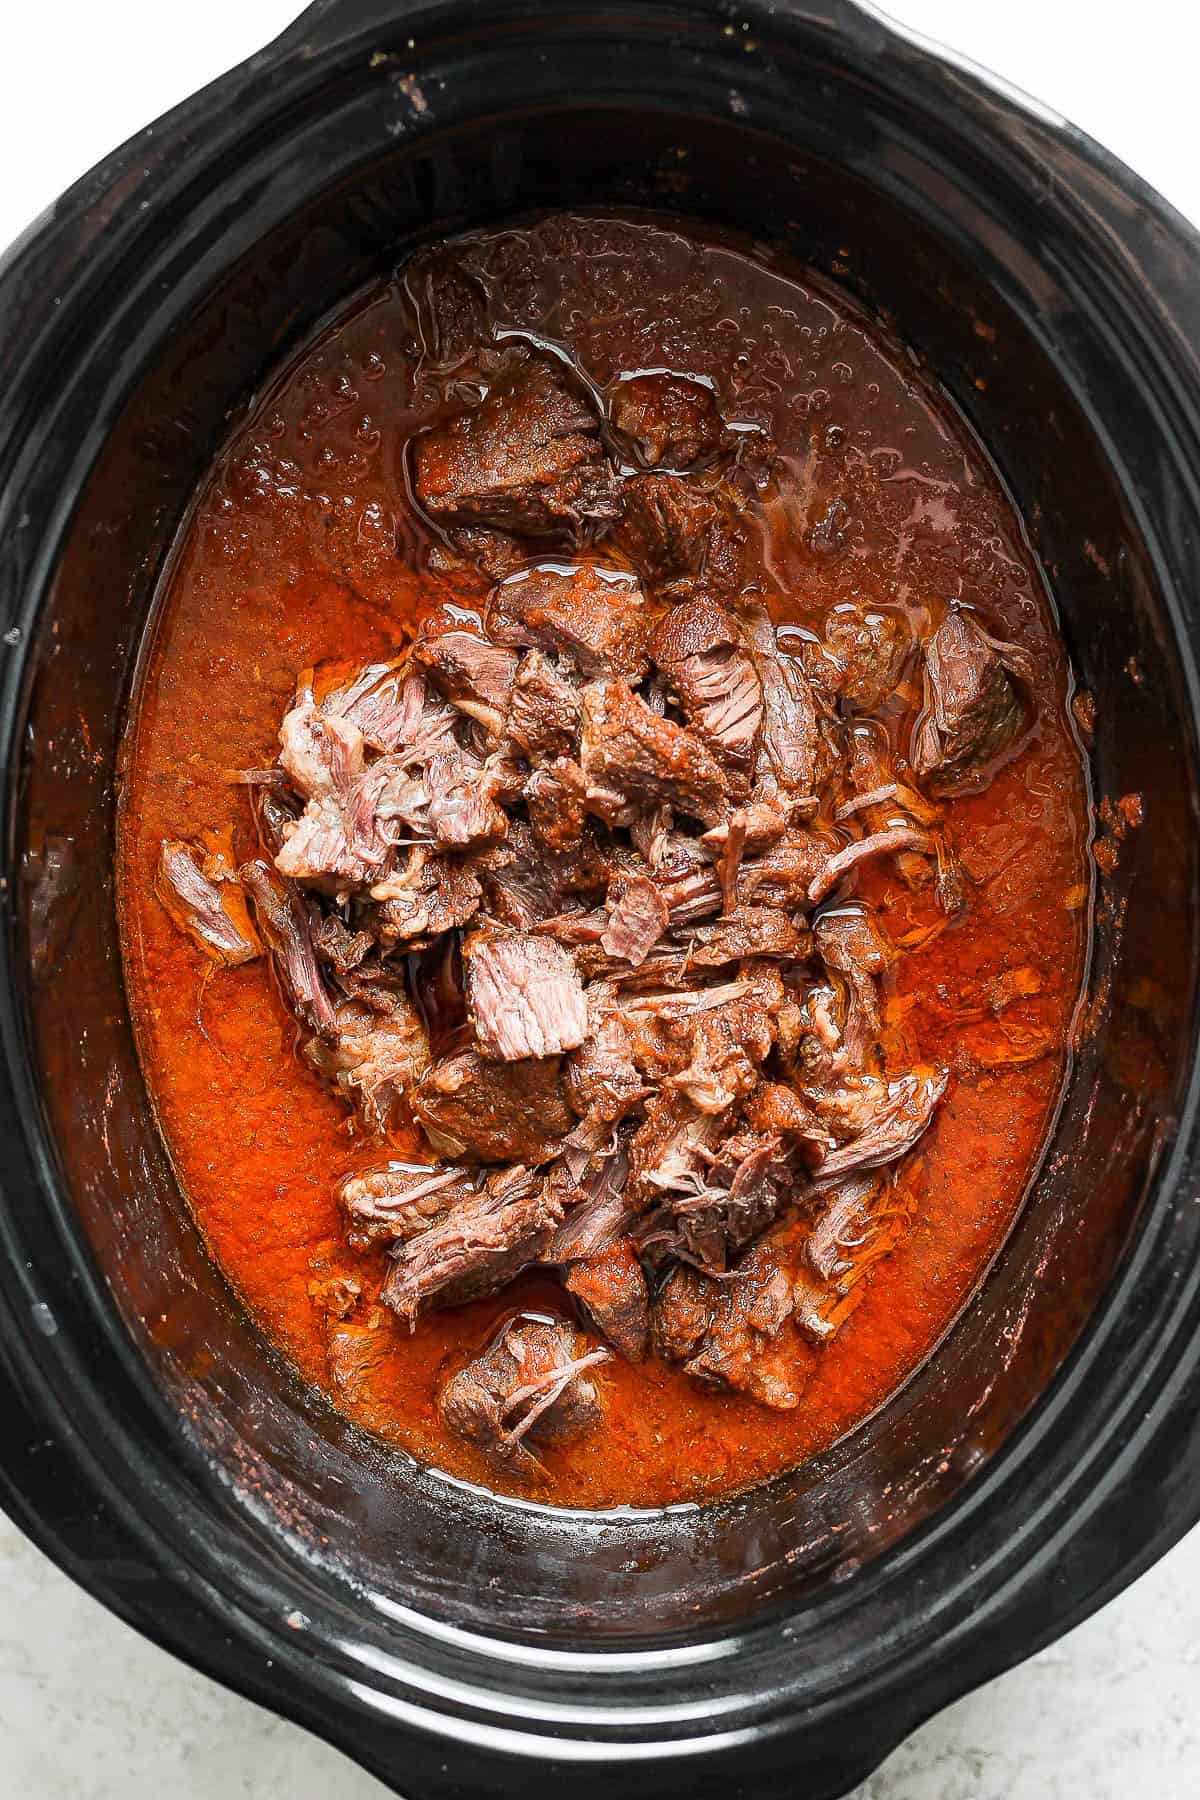 Beef is shredded and added back into the crockpot 